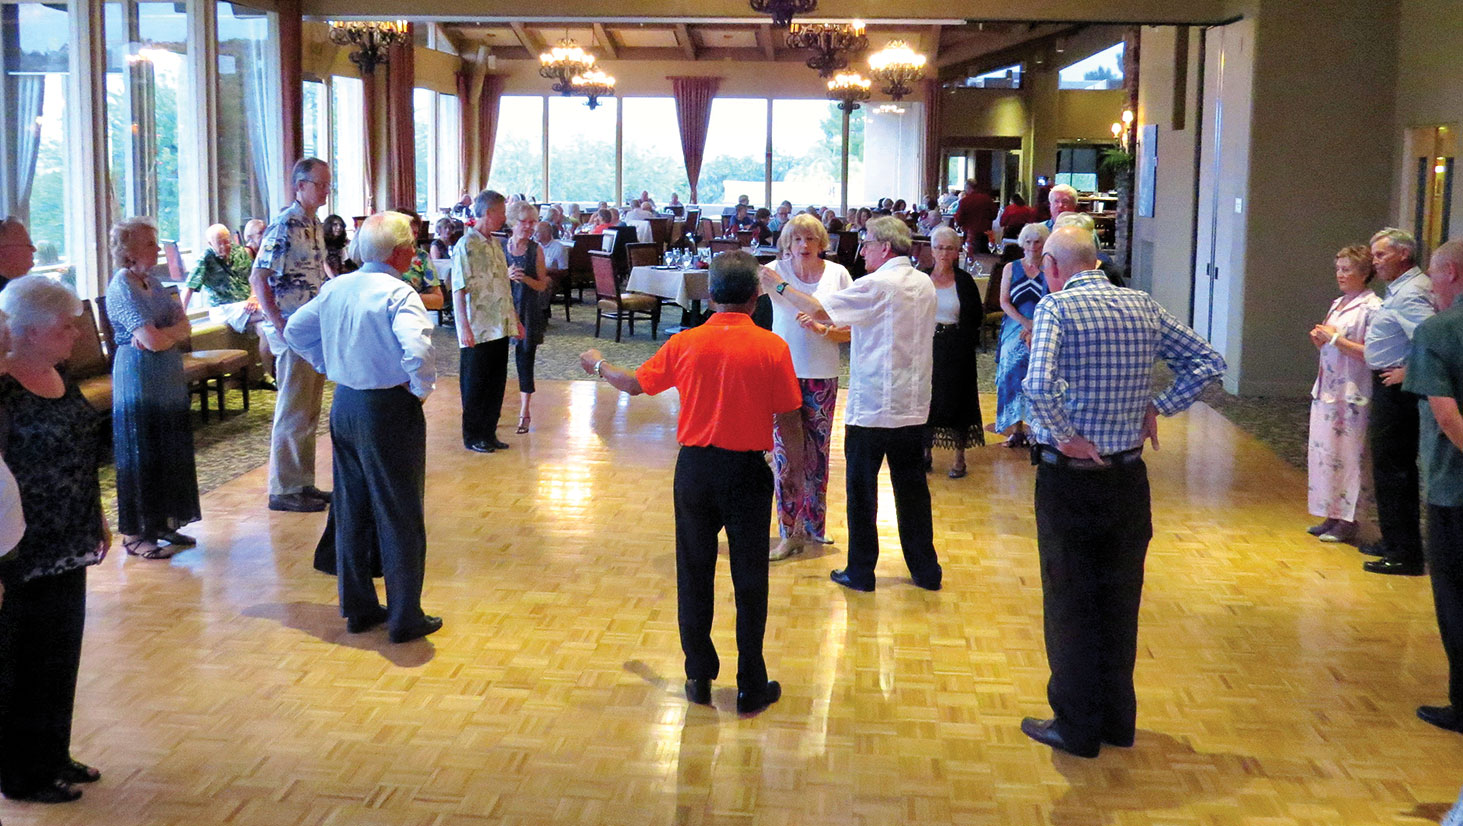 Salsa lesson at Hot August Nights, 2015